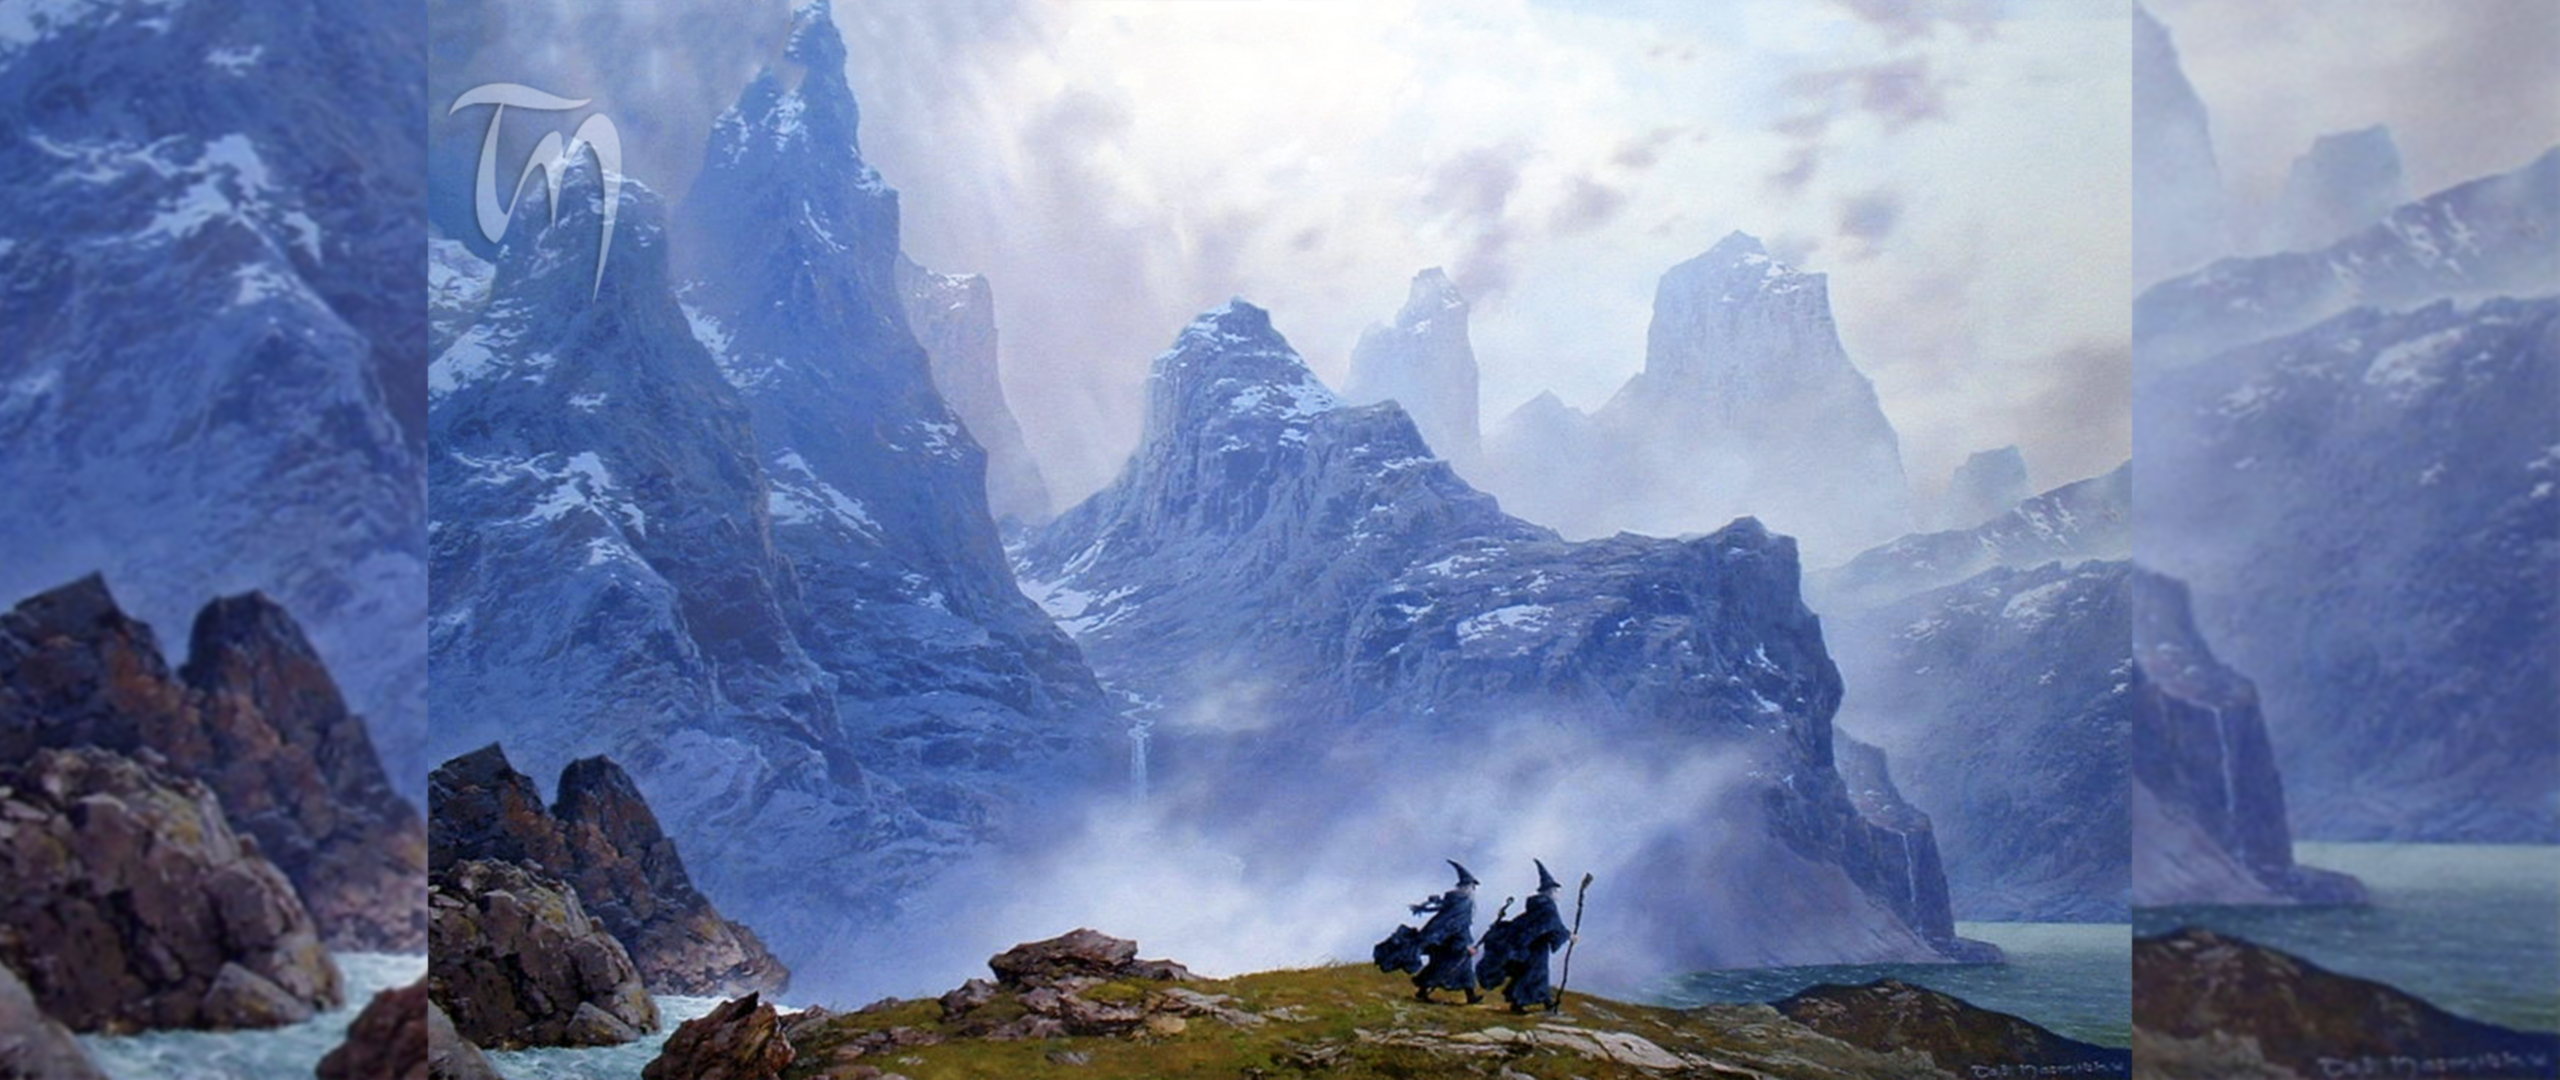 2560x1080 Wallpaper : blue, wizard, Blue Wizards, J R R Tolkien, Ted Nasmith, Middle earth, The Lord of the Rings, The Hobbit, Hobbits, istari Ansebi 1620145 HD Wallpapers